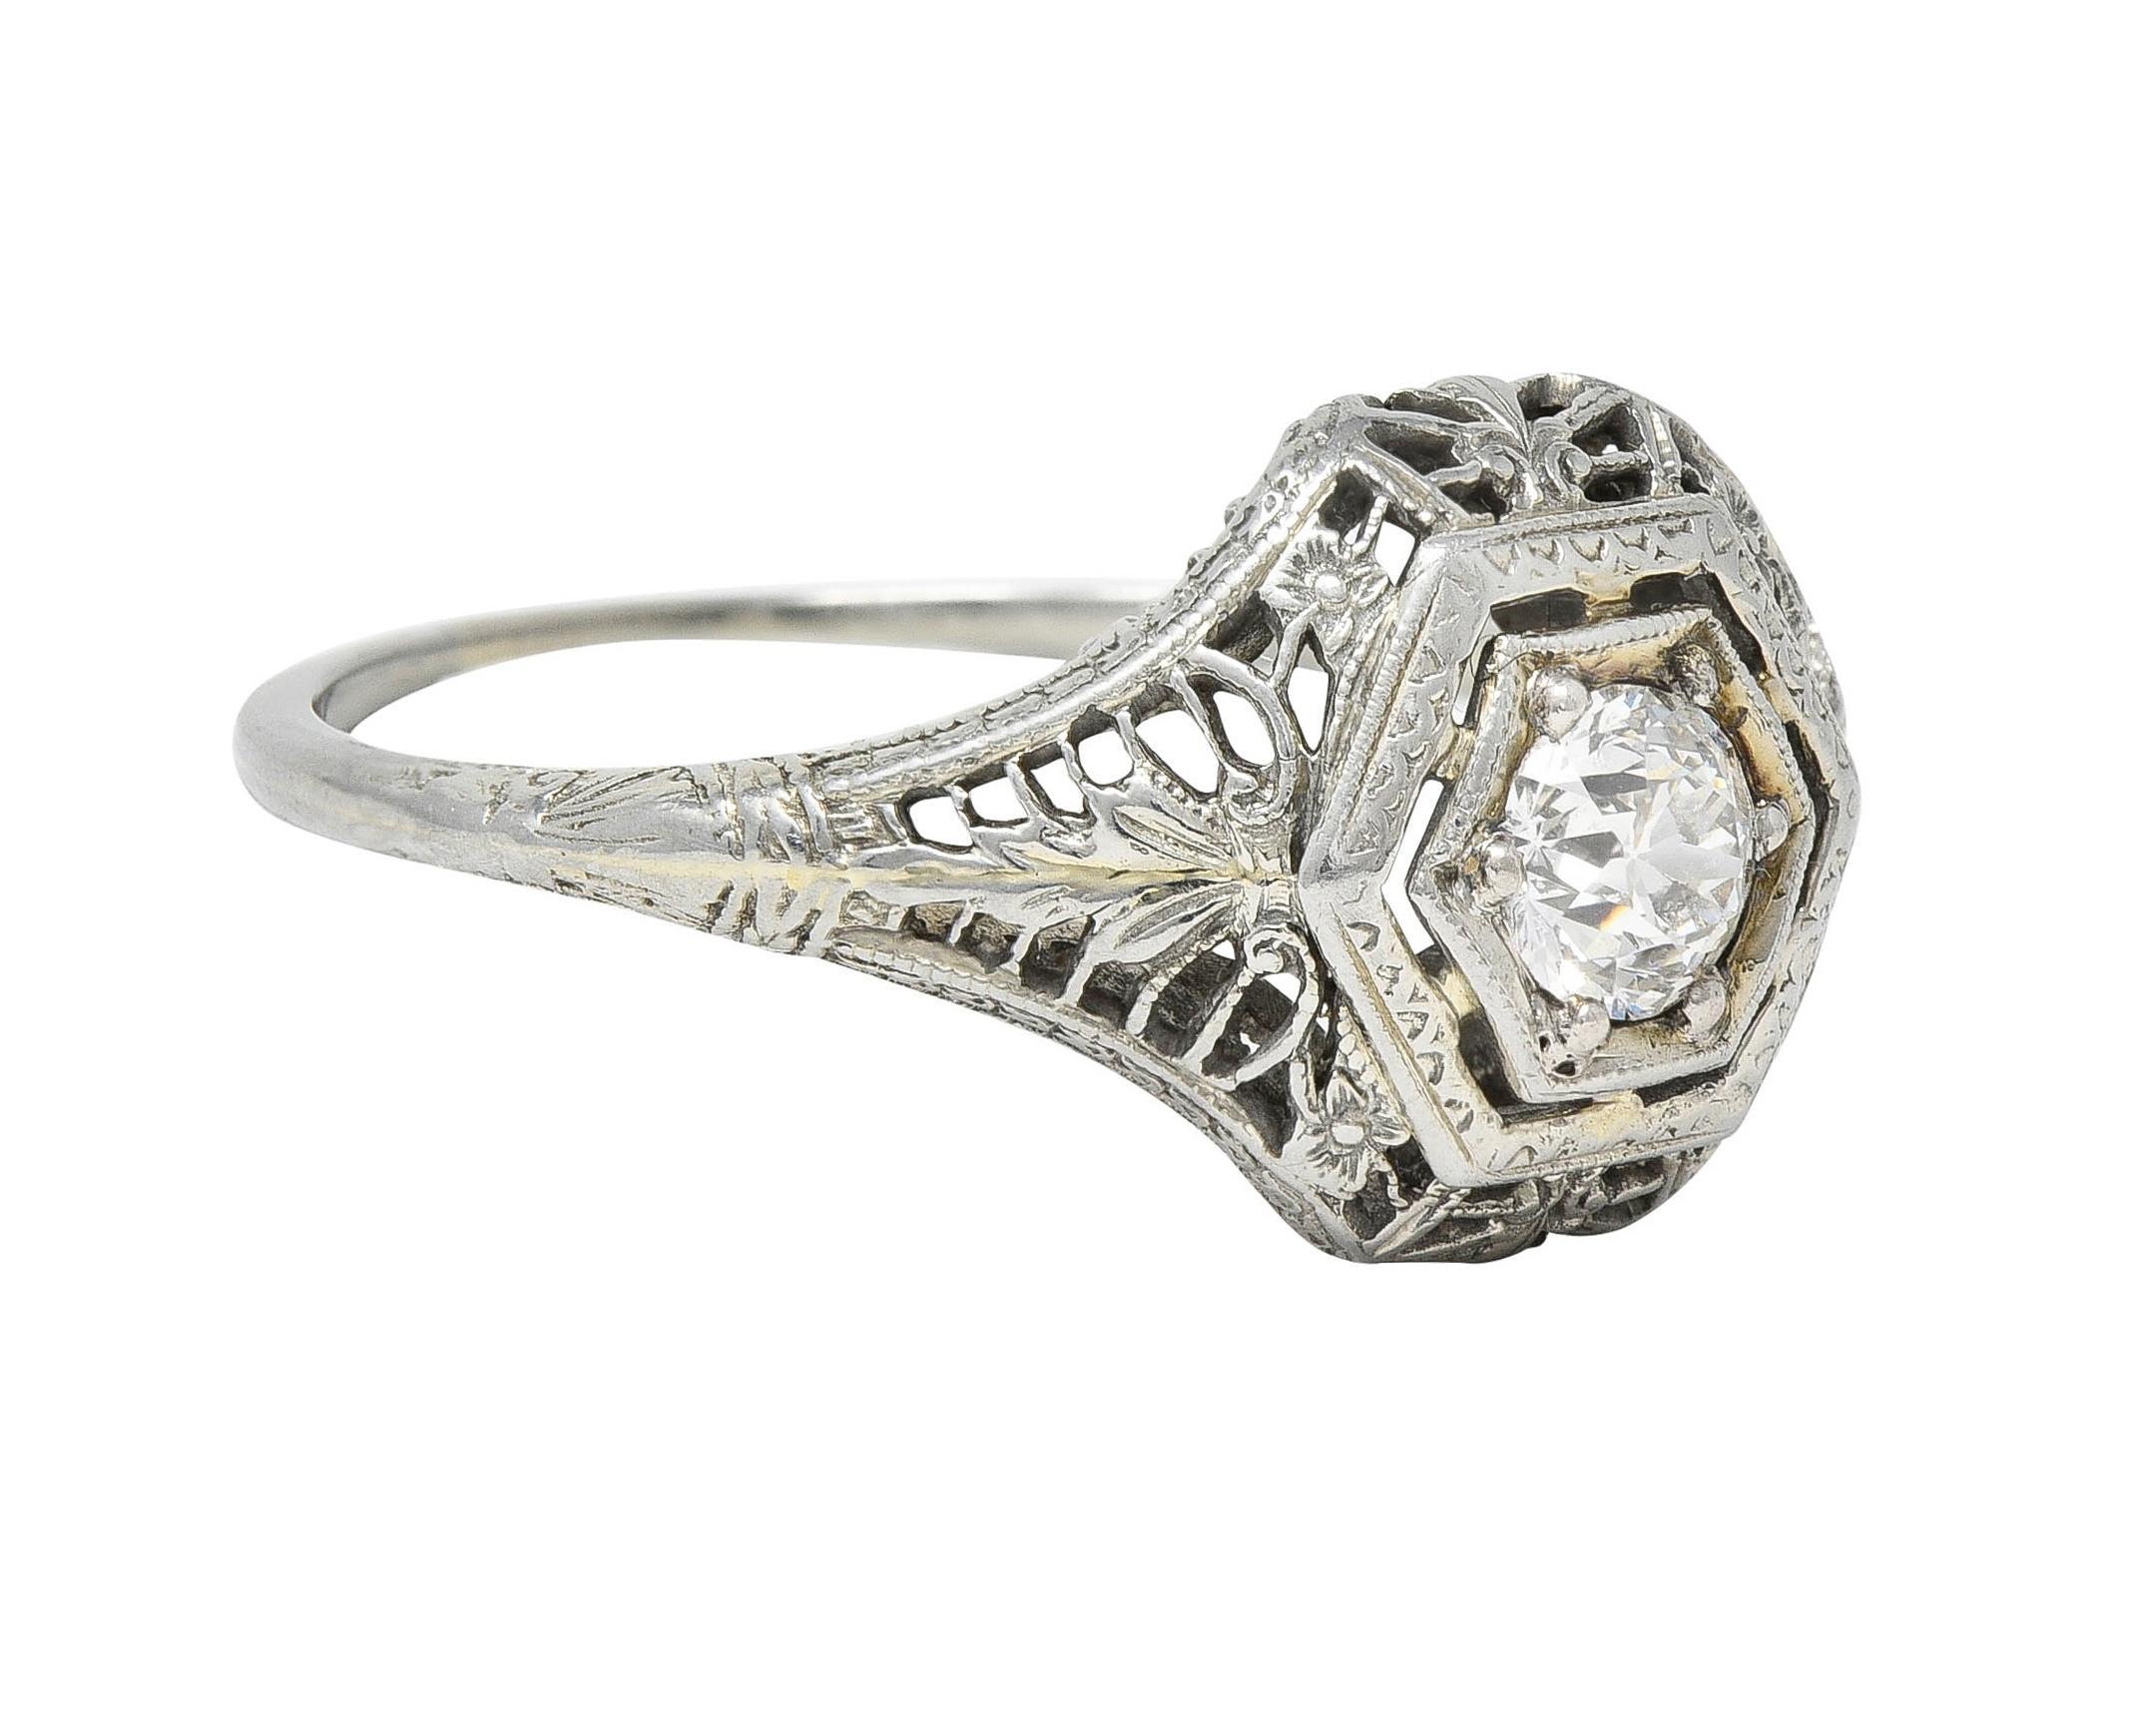 Centering an old European cut diamond weighing approximately 0.35 carat - G color with VS2 clarity
Bead set in a hexagonal form head with a hexagonal shaped bombé surround 
Pierced with orange blossom motif profile and foliate motif